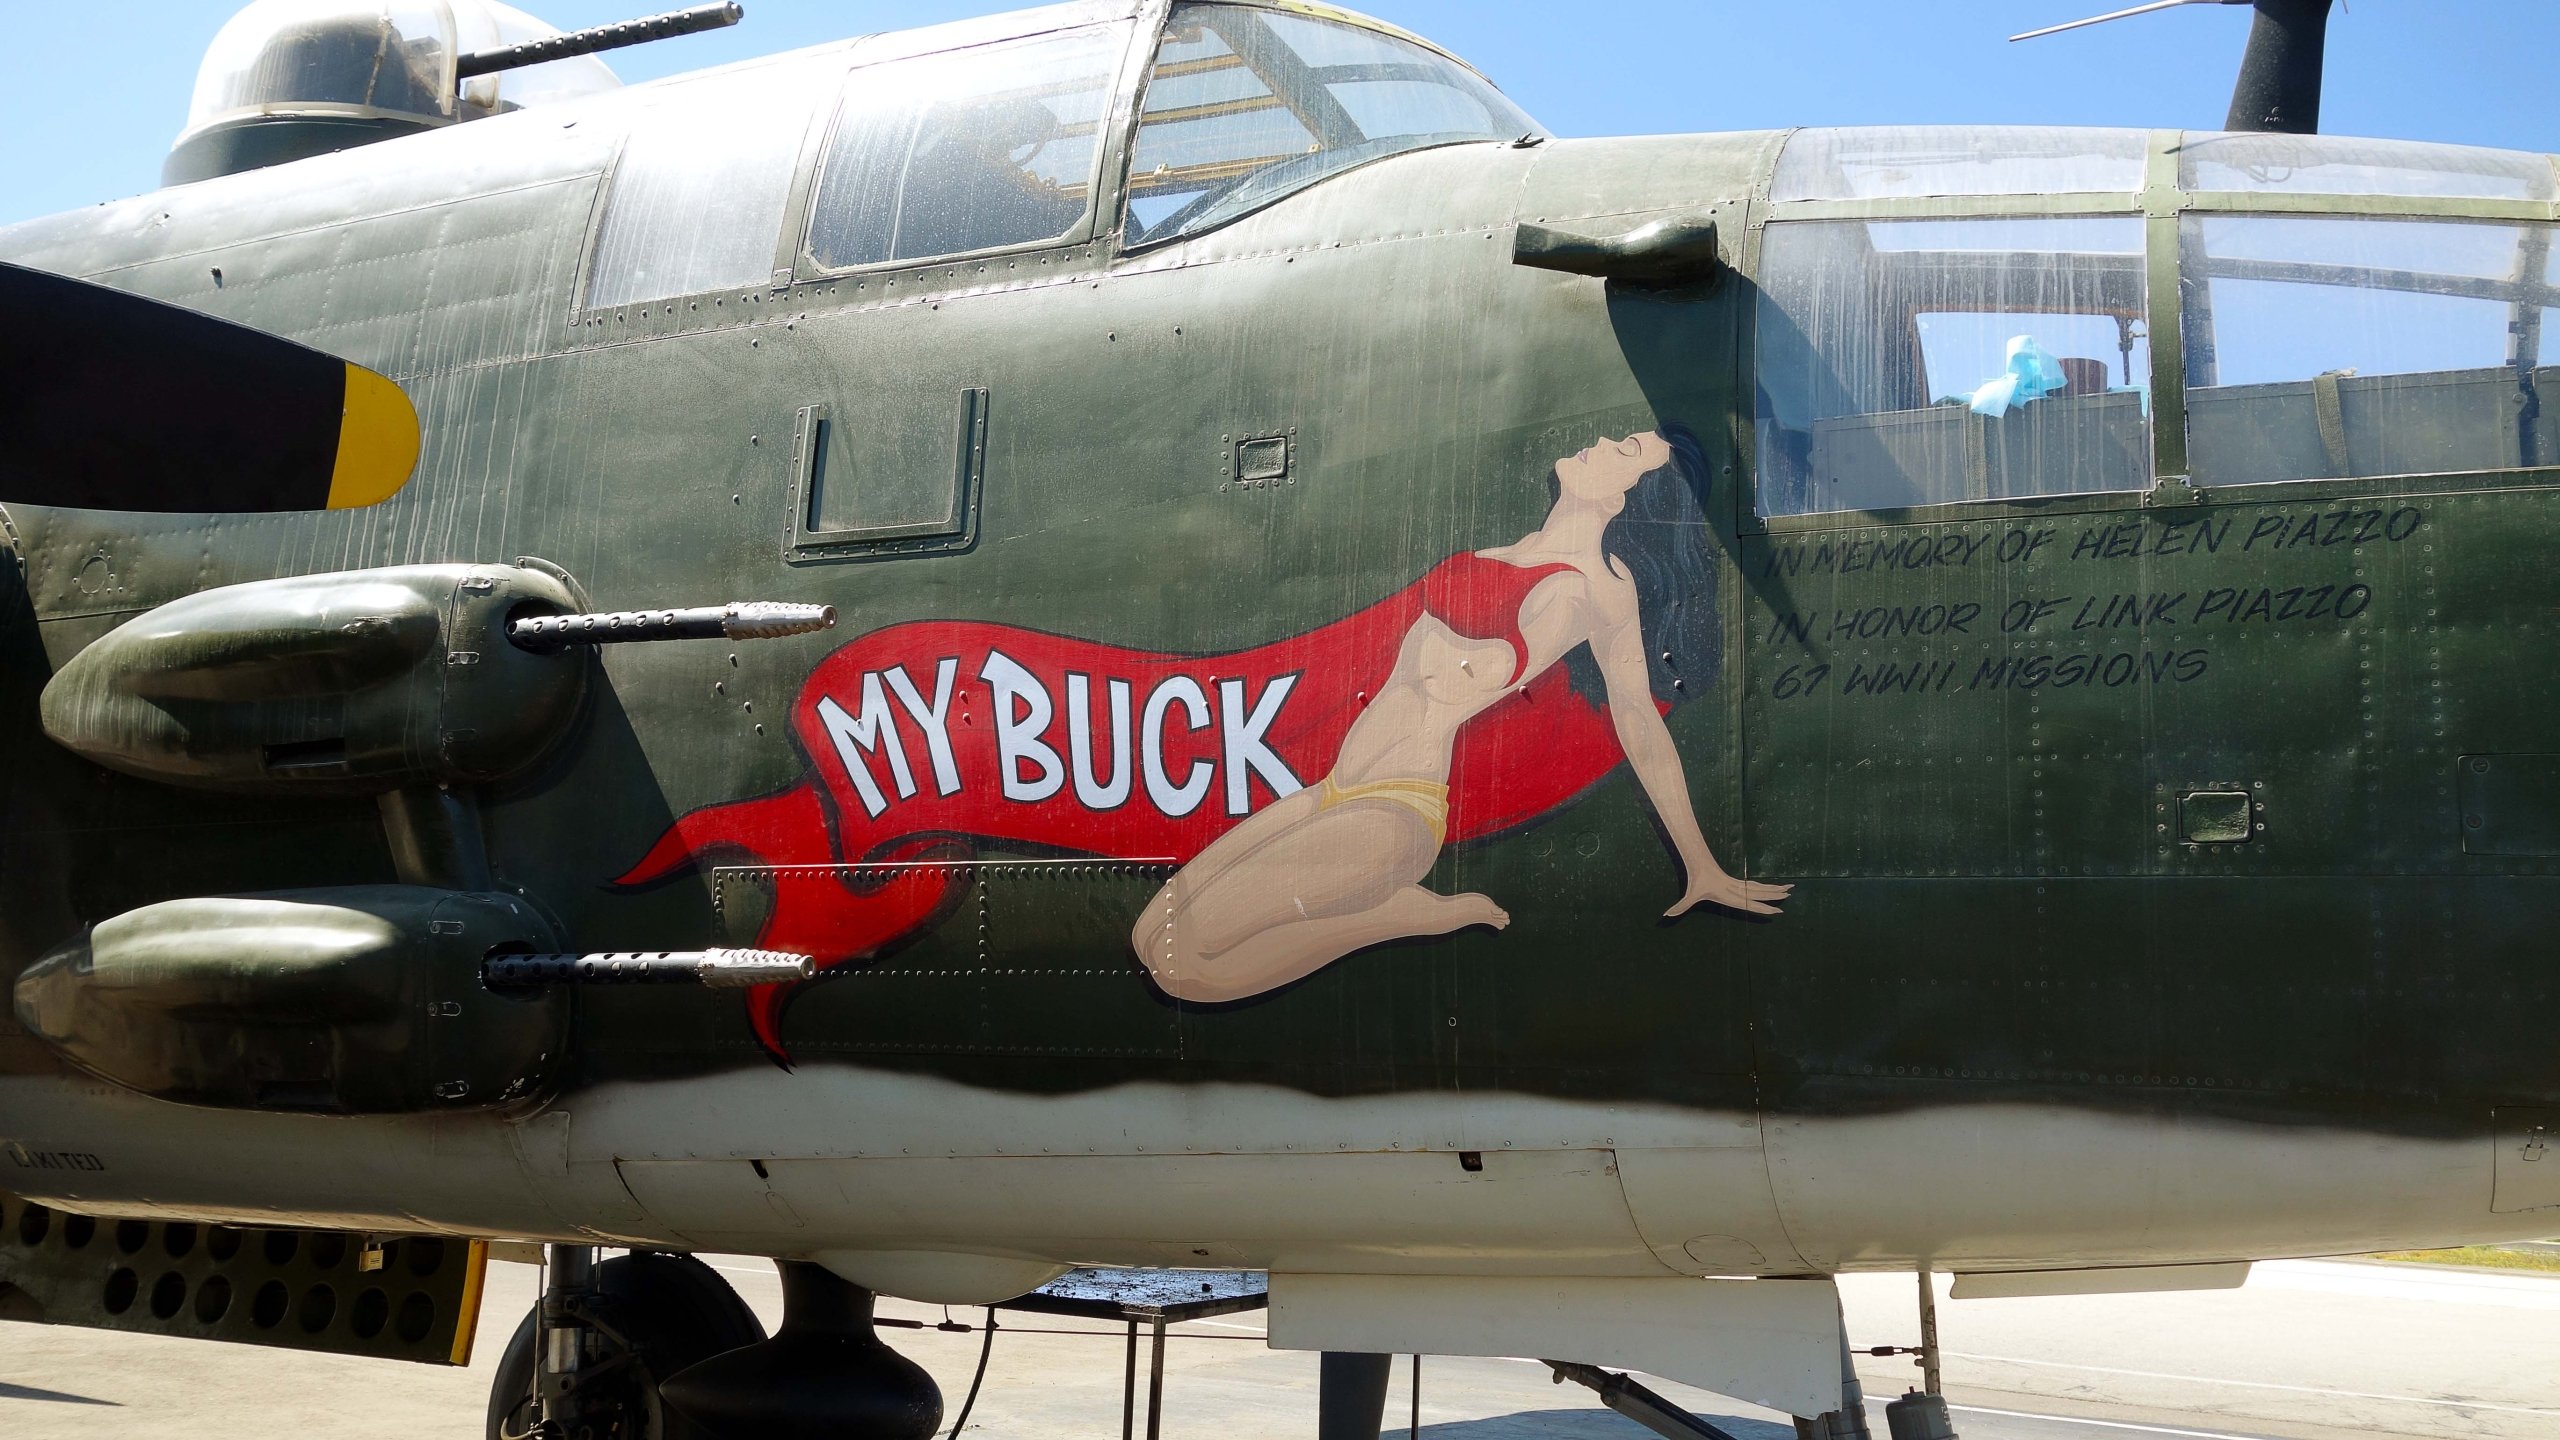 Download hd 2560x1440 Aircraft Nose Art desktop background ID:62229 for free